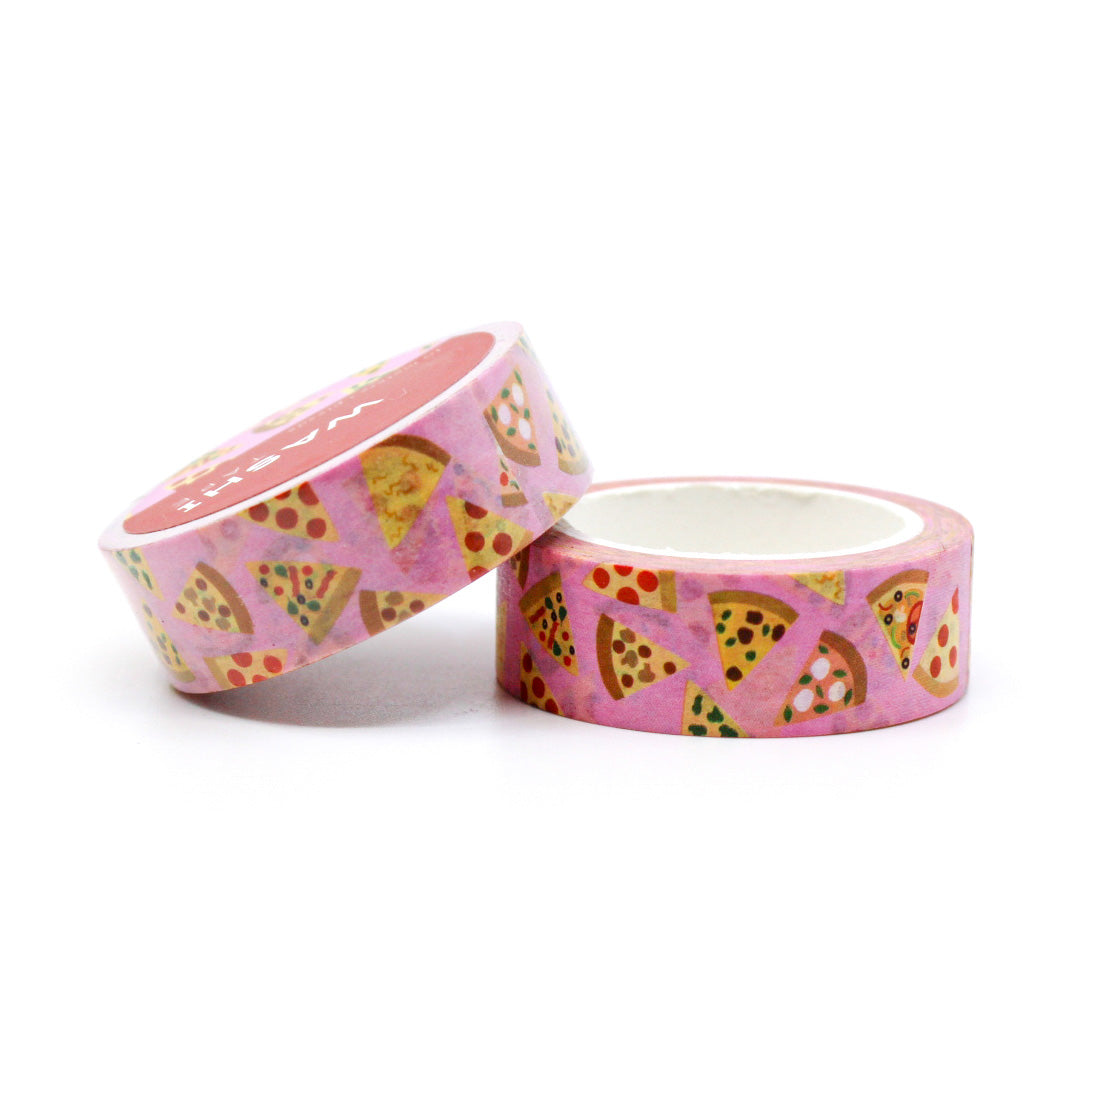 Satisfy your crafting cravings with our Pizza Washi Tape, adorned with mouthwatering pizza slices. Ideal for adding a slice of fun and Italian flair to your projects. This tape is designed by Girl of All Work and sold at BBB Supplies Craft Shop.